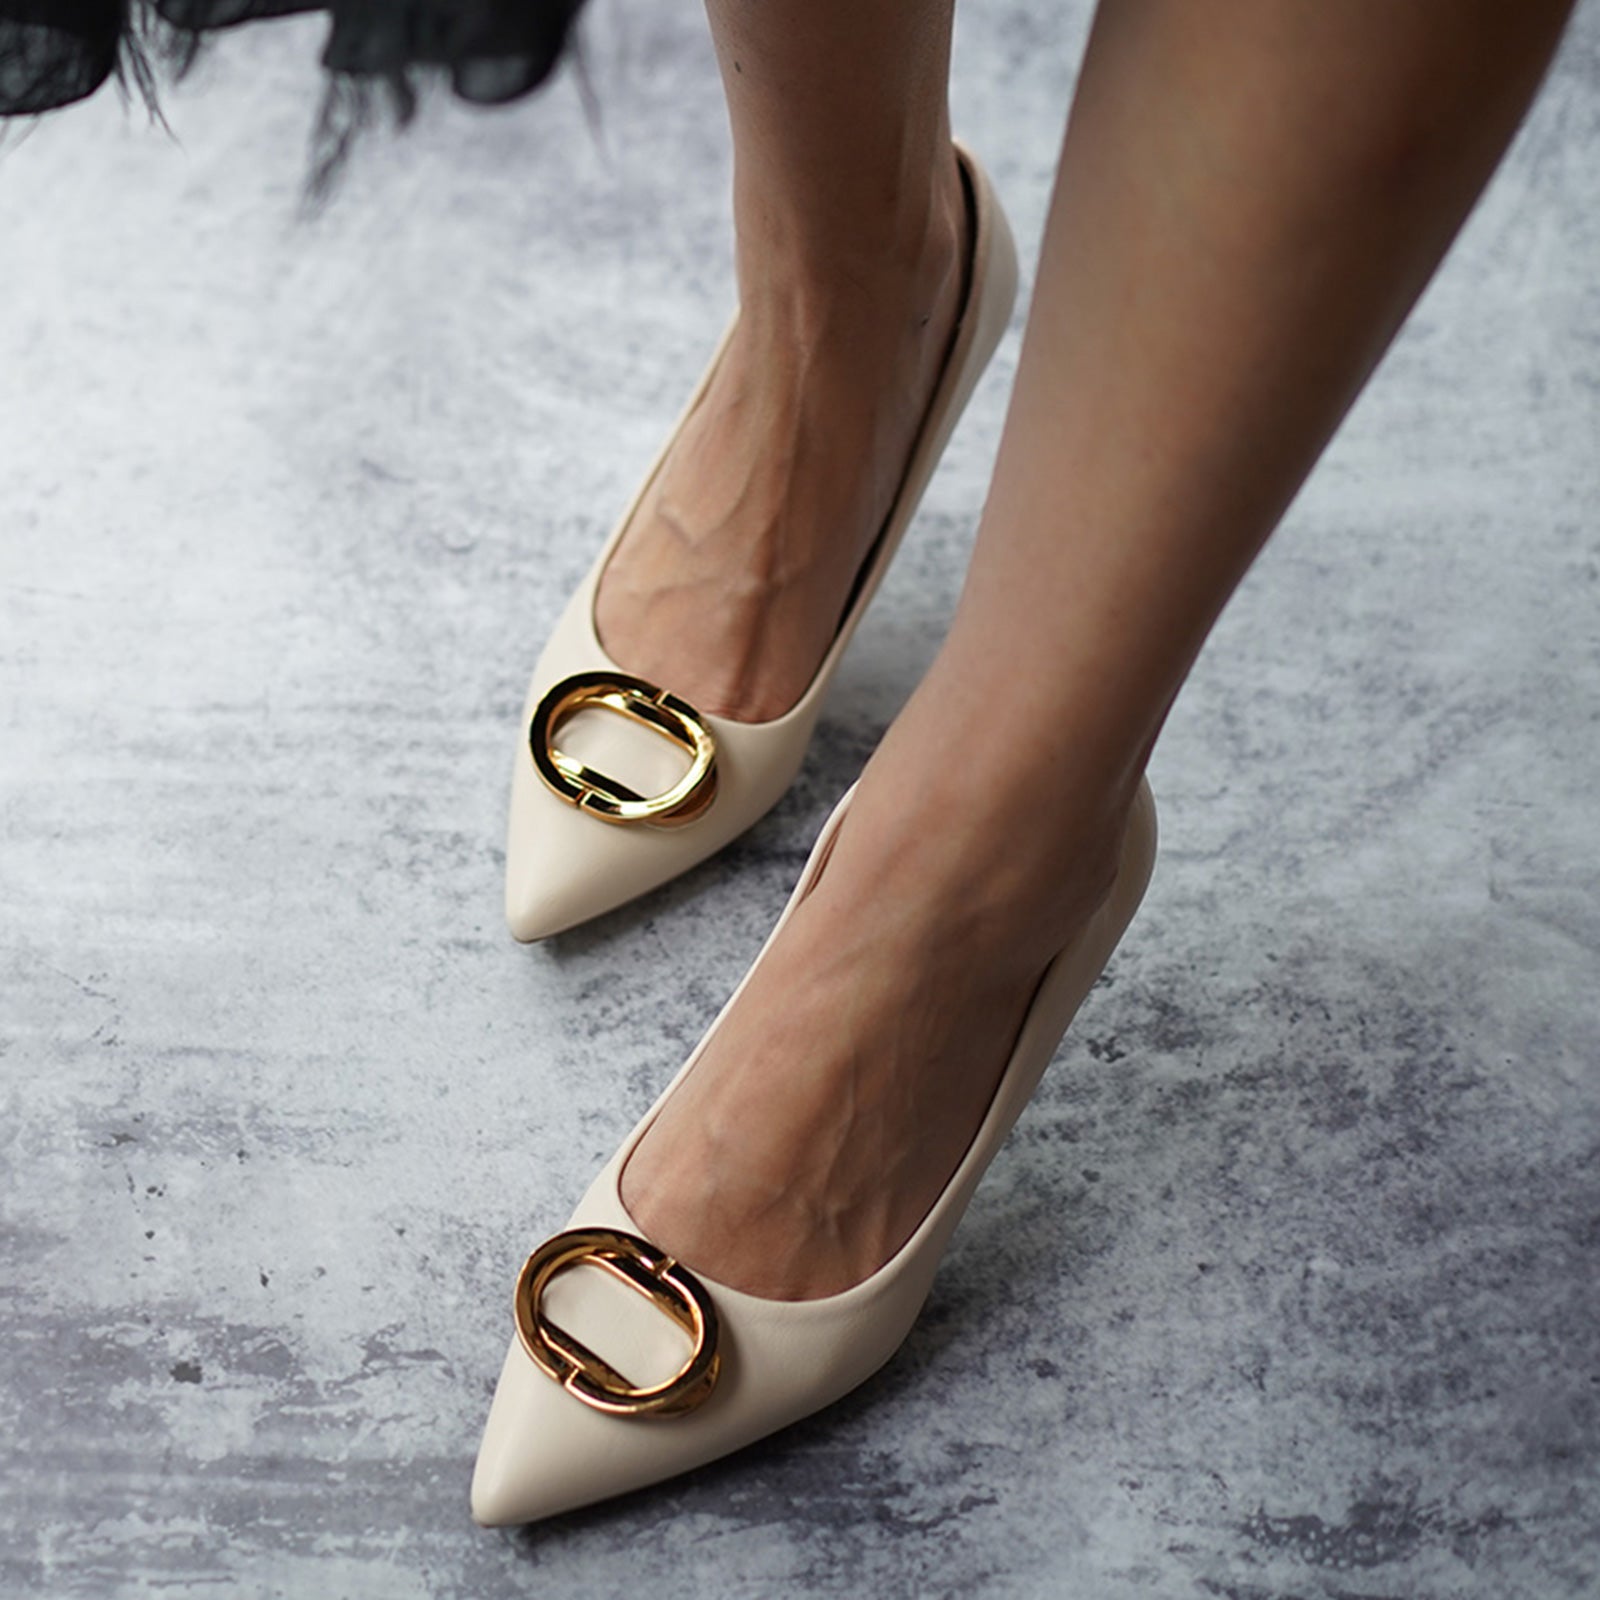 White Women Pumps featuring metal buckles, a timeless and elegant option for any occasion.